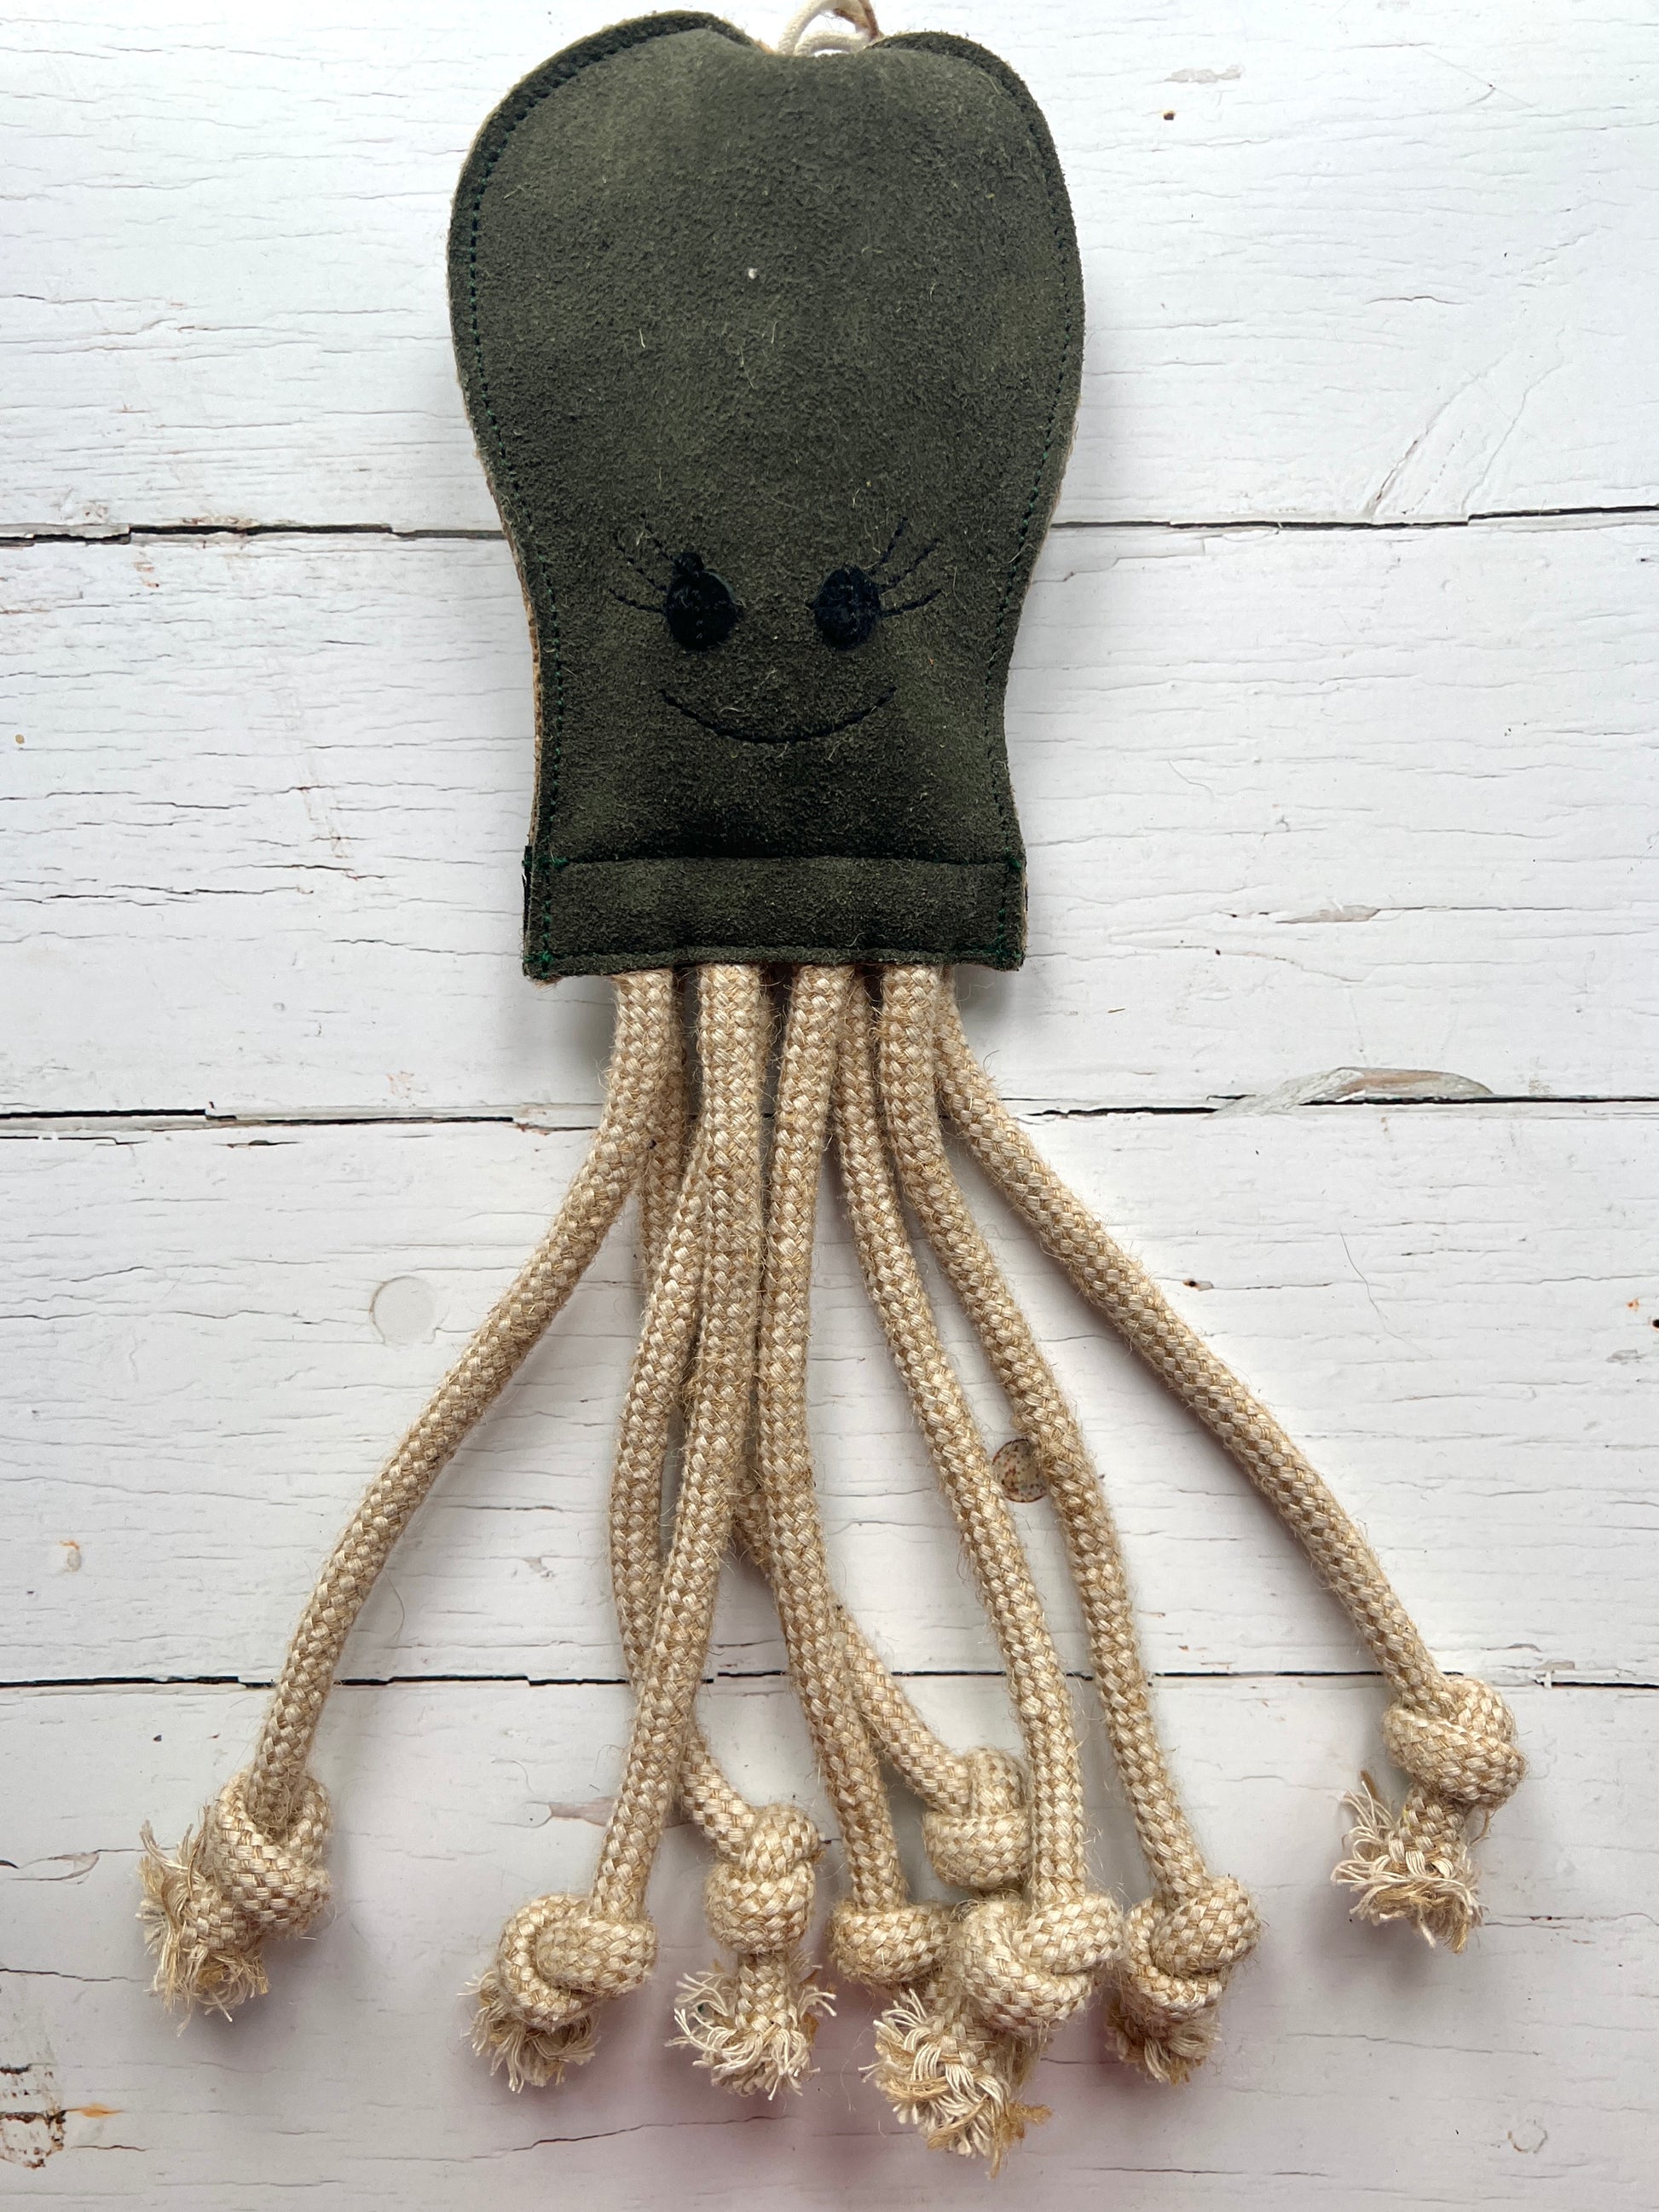 eco friendly dog toys, jute & suede: octopus